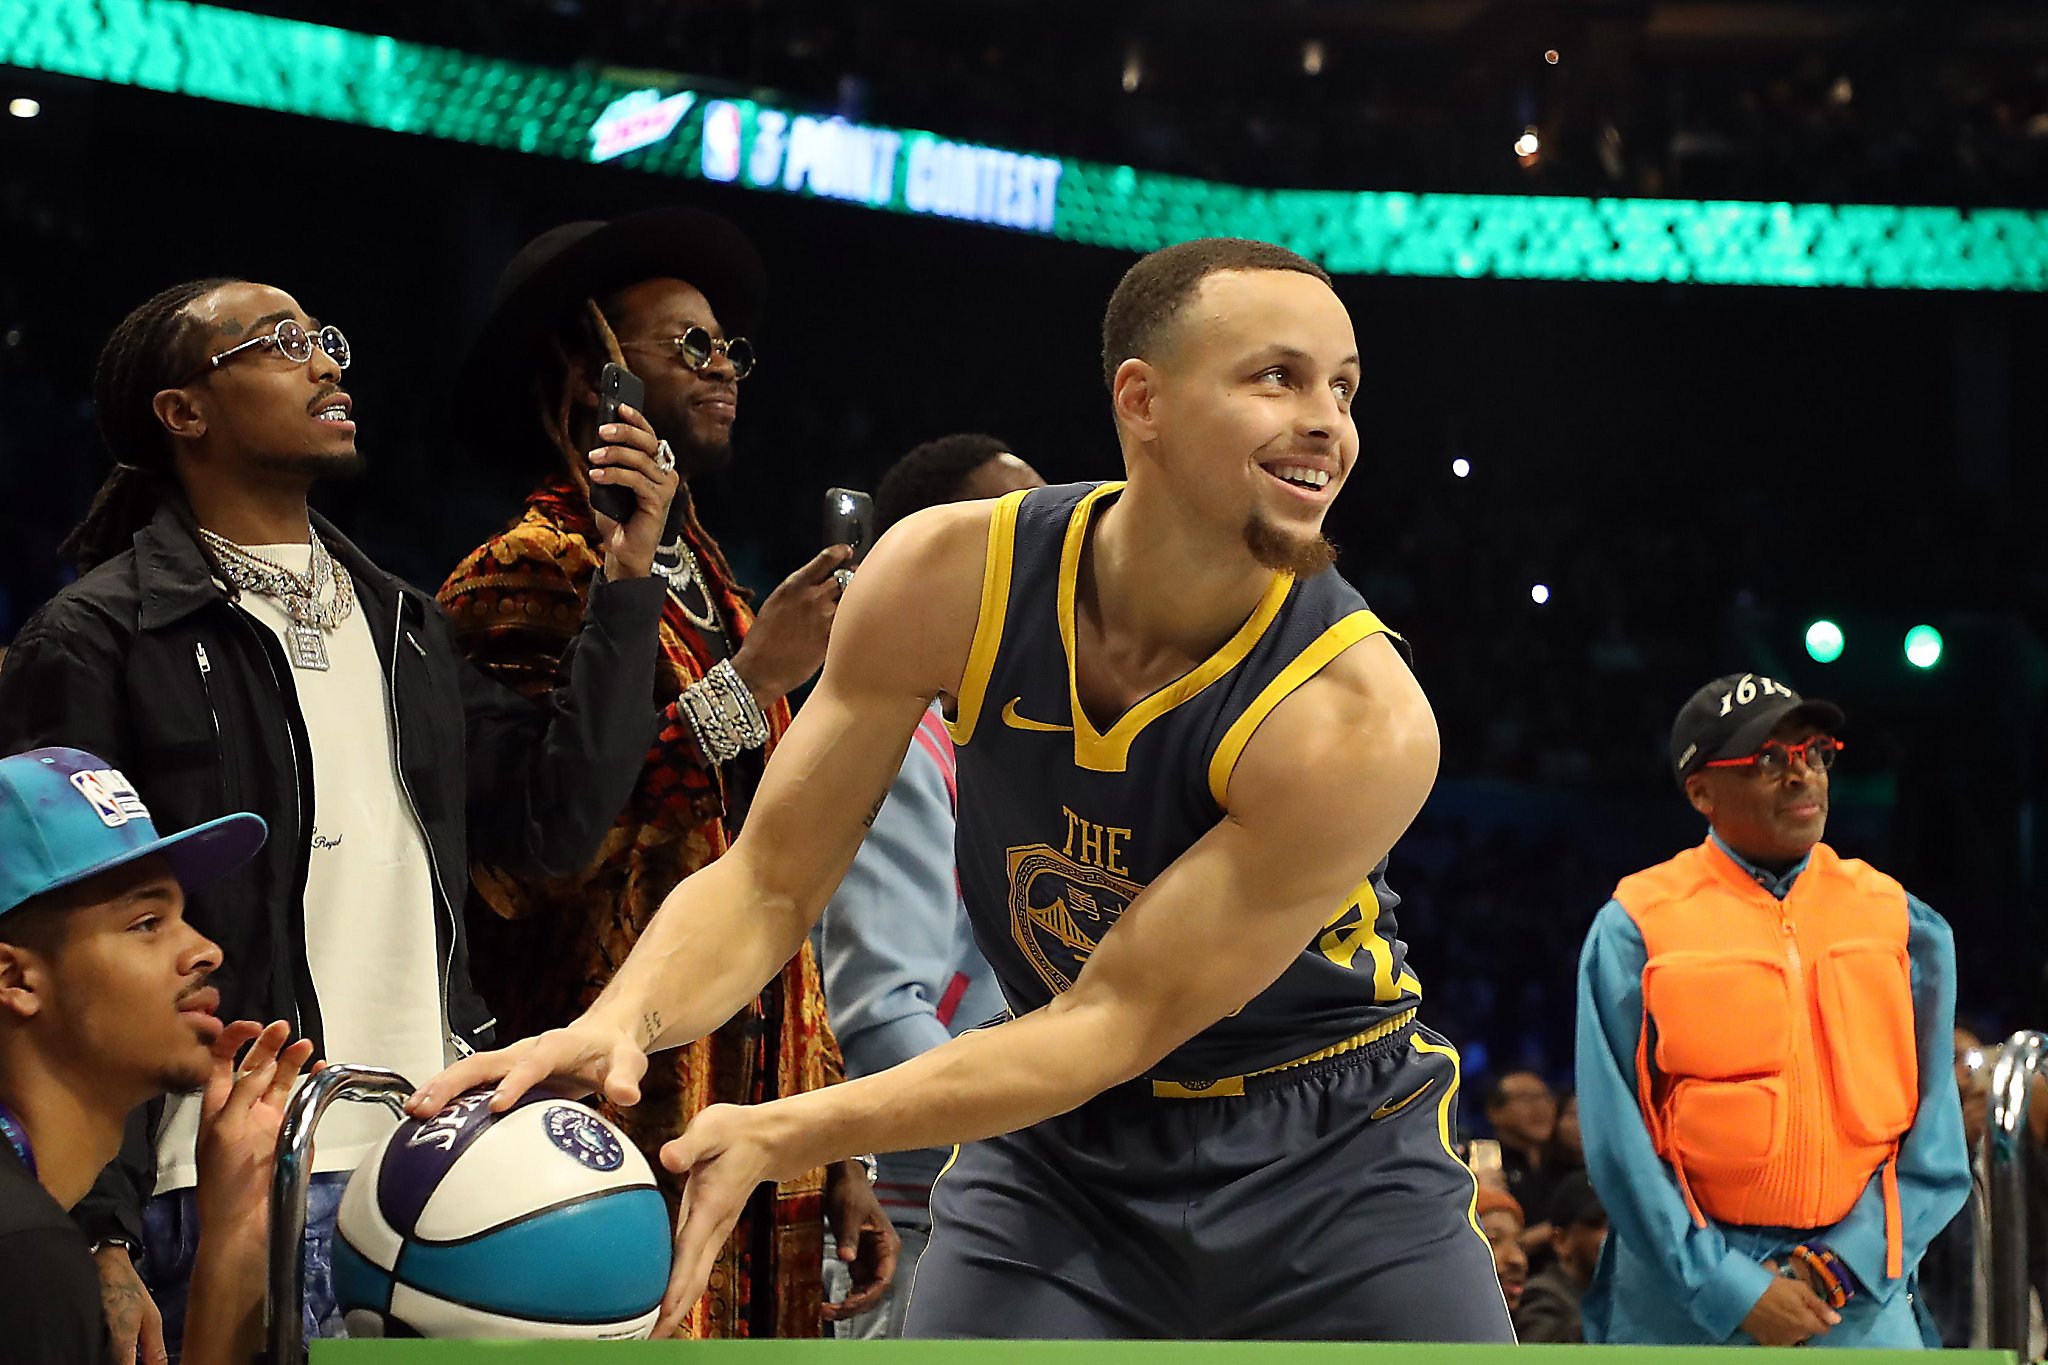 Steph Curry's wearing the same jacket to All-Star he wore as a kid 